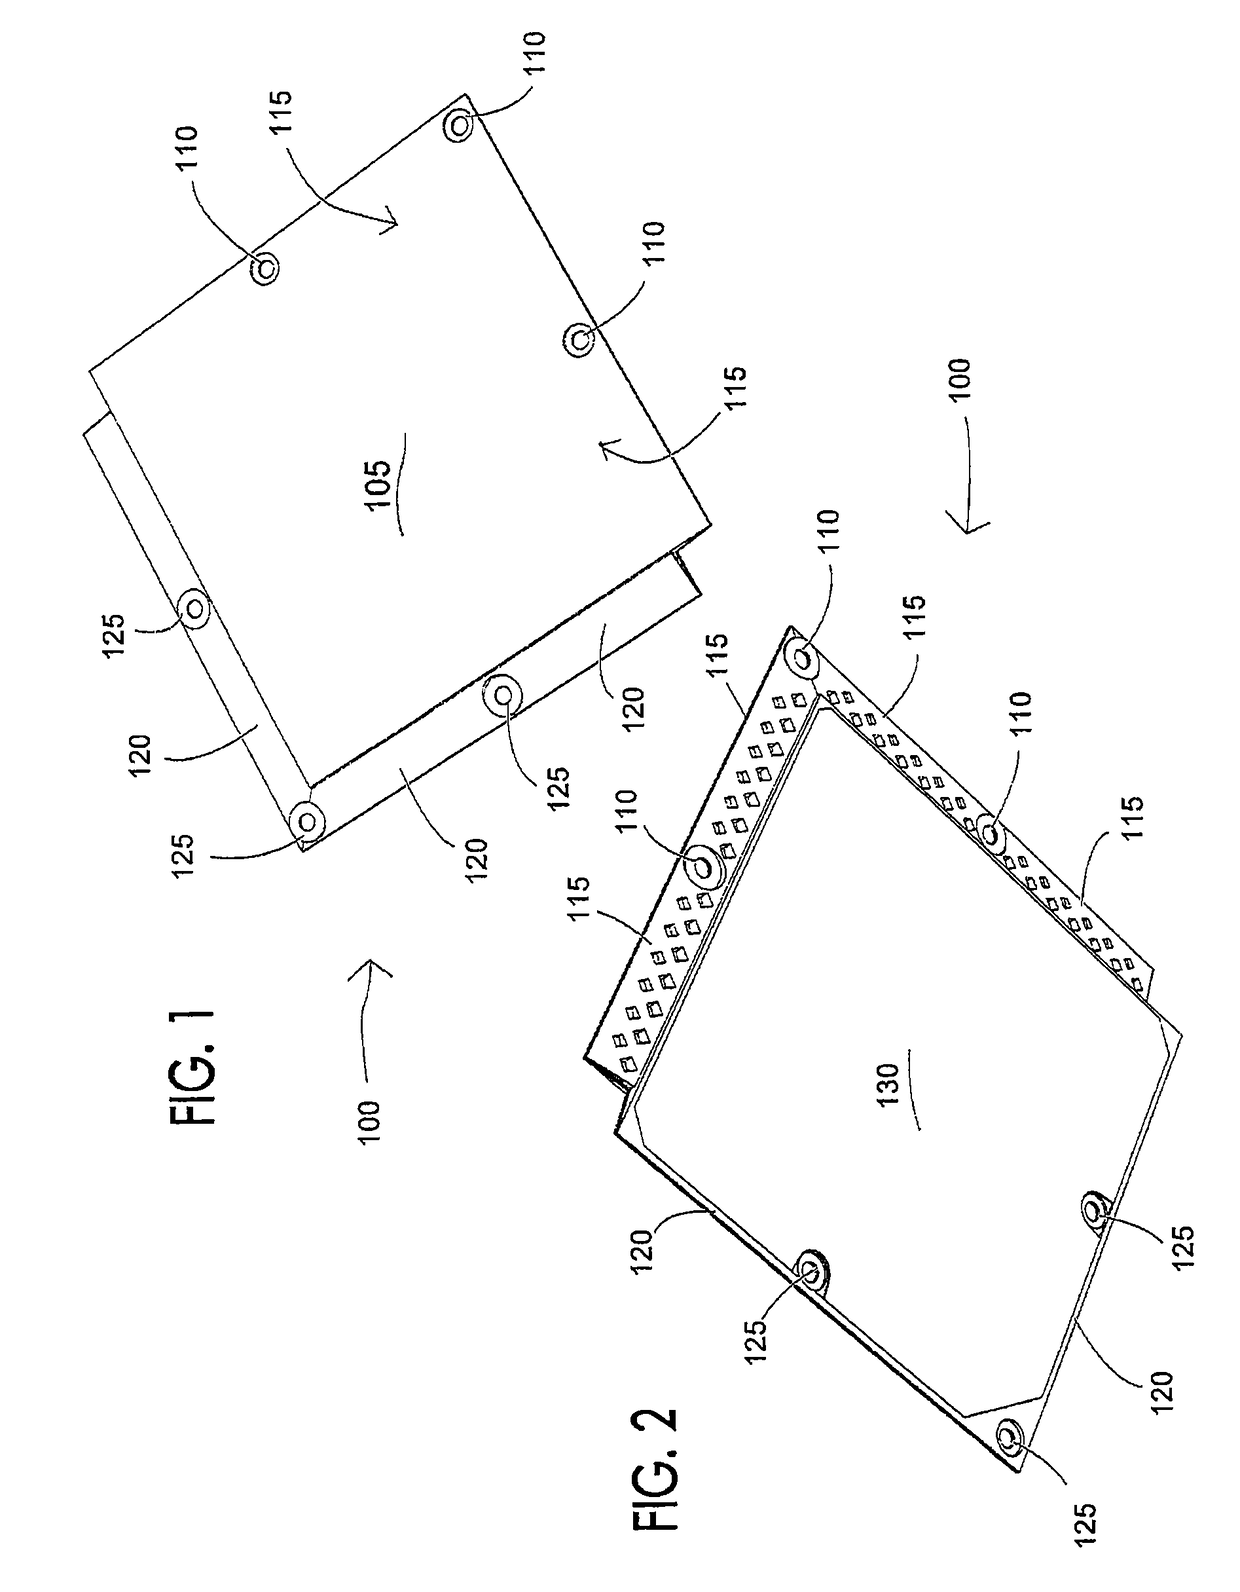 Panel mats connectable with interlocking and pinning elements